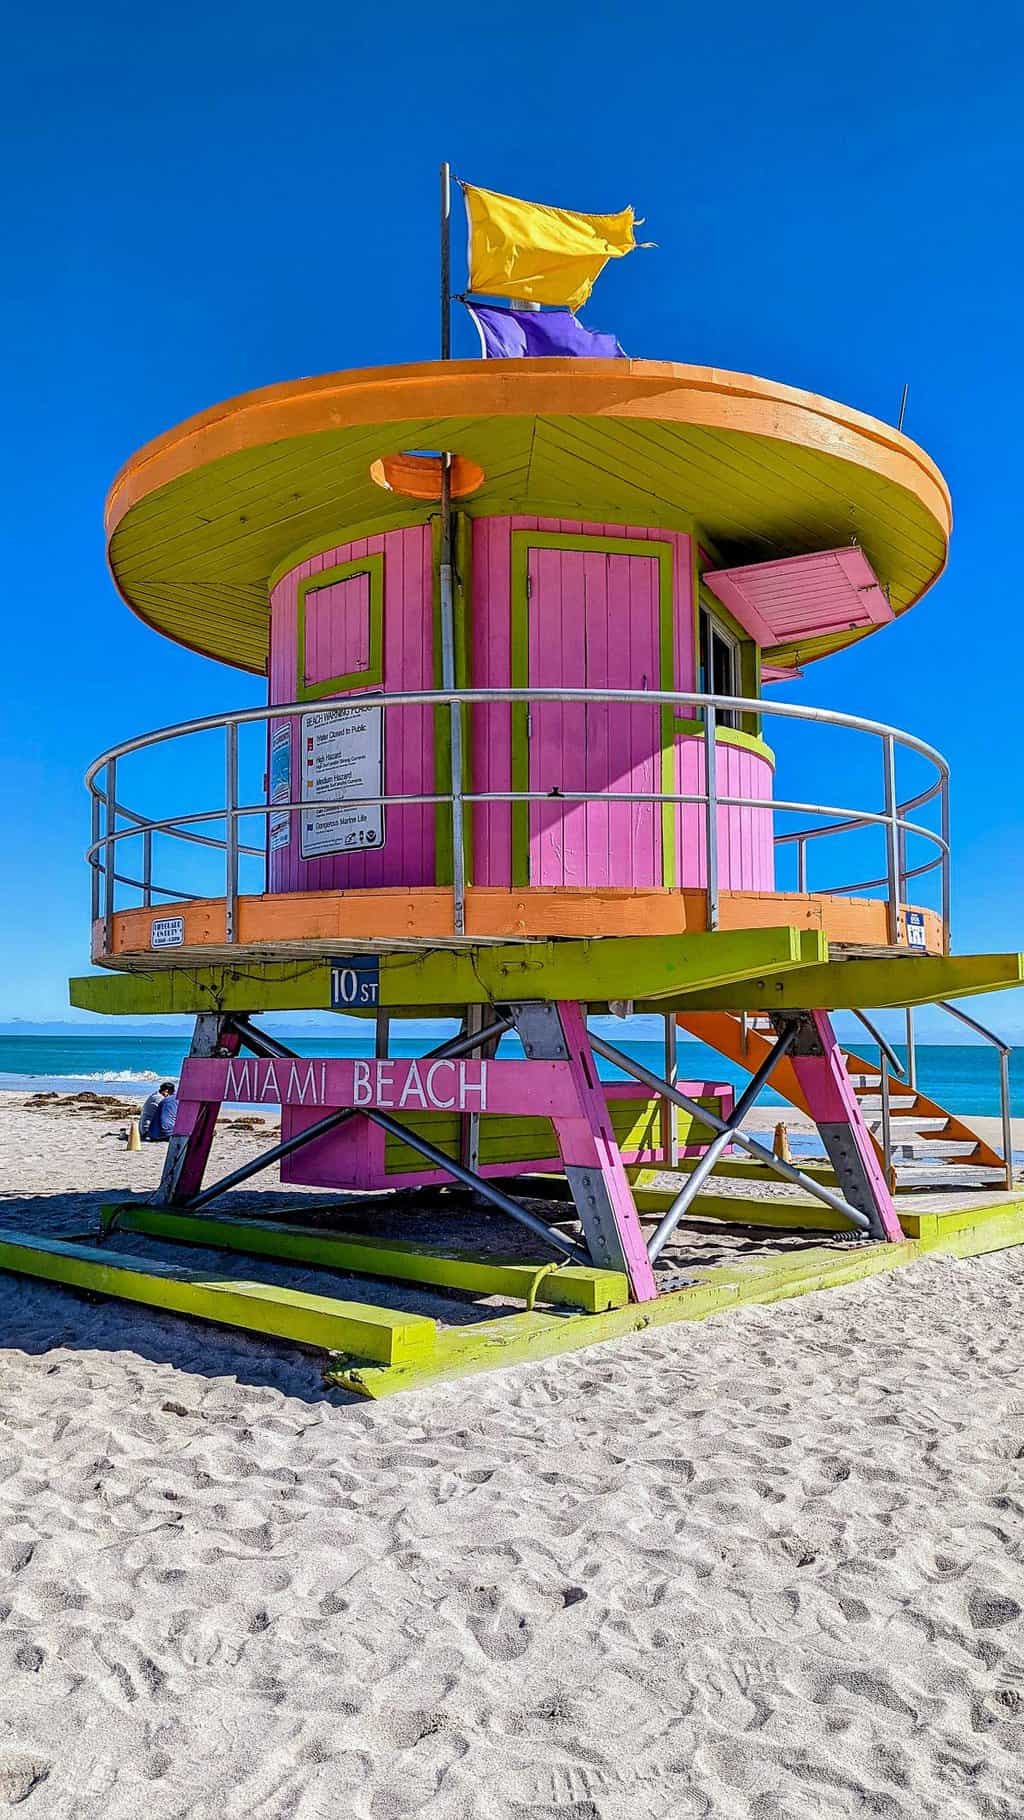 Life guard tower on Miami beach painted bright pink and yellow. 